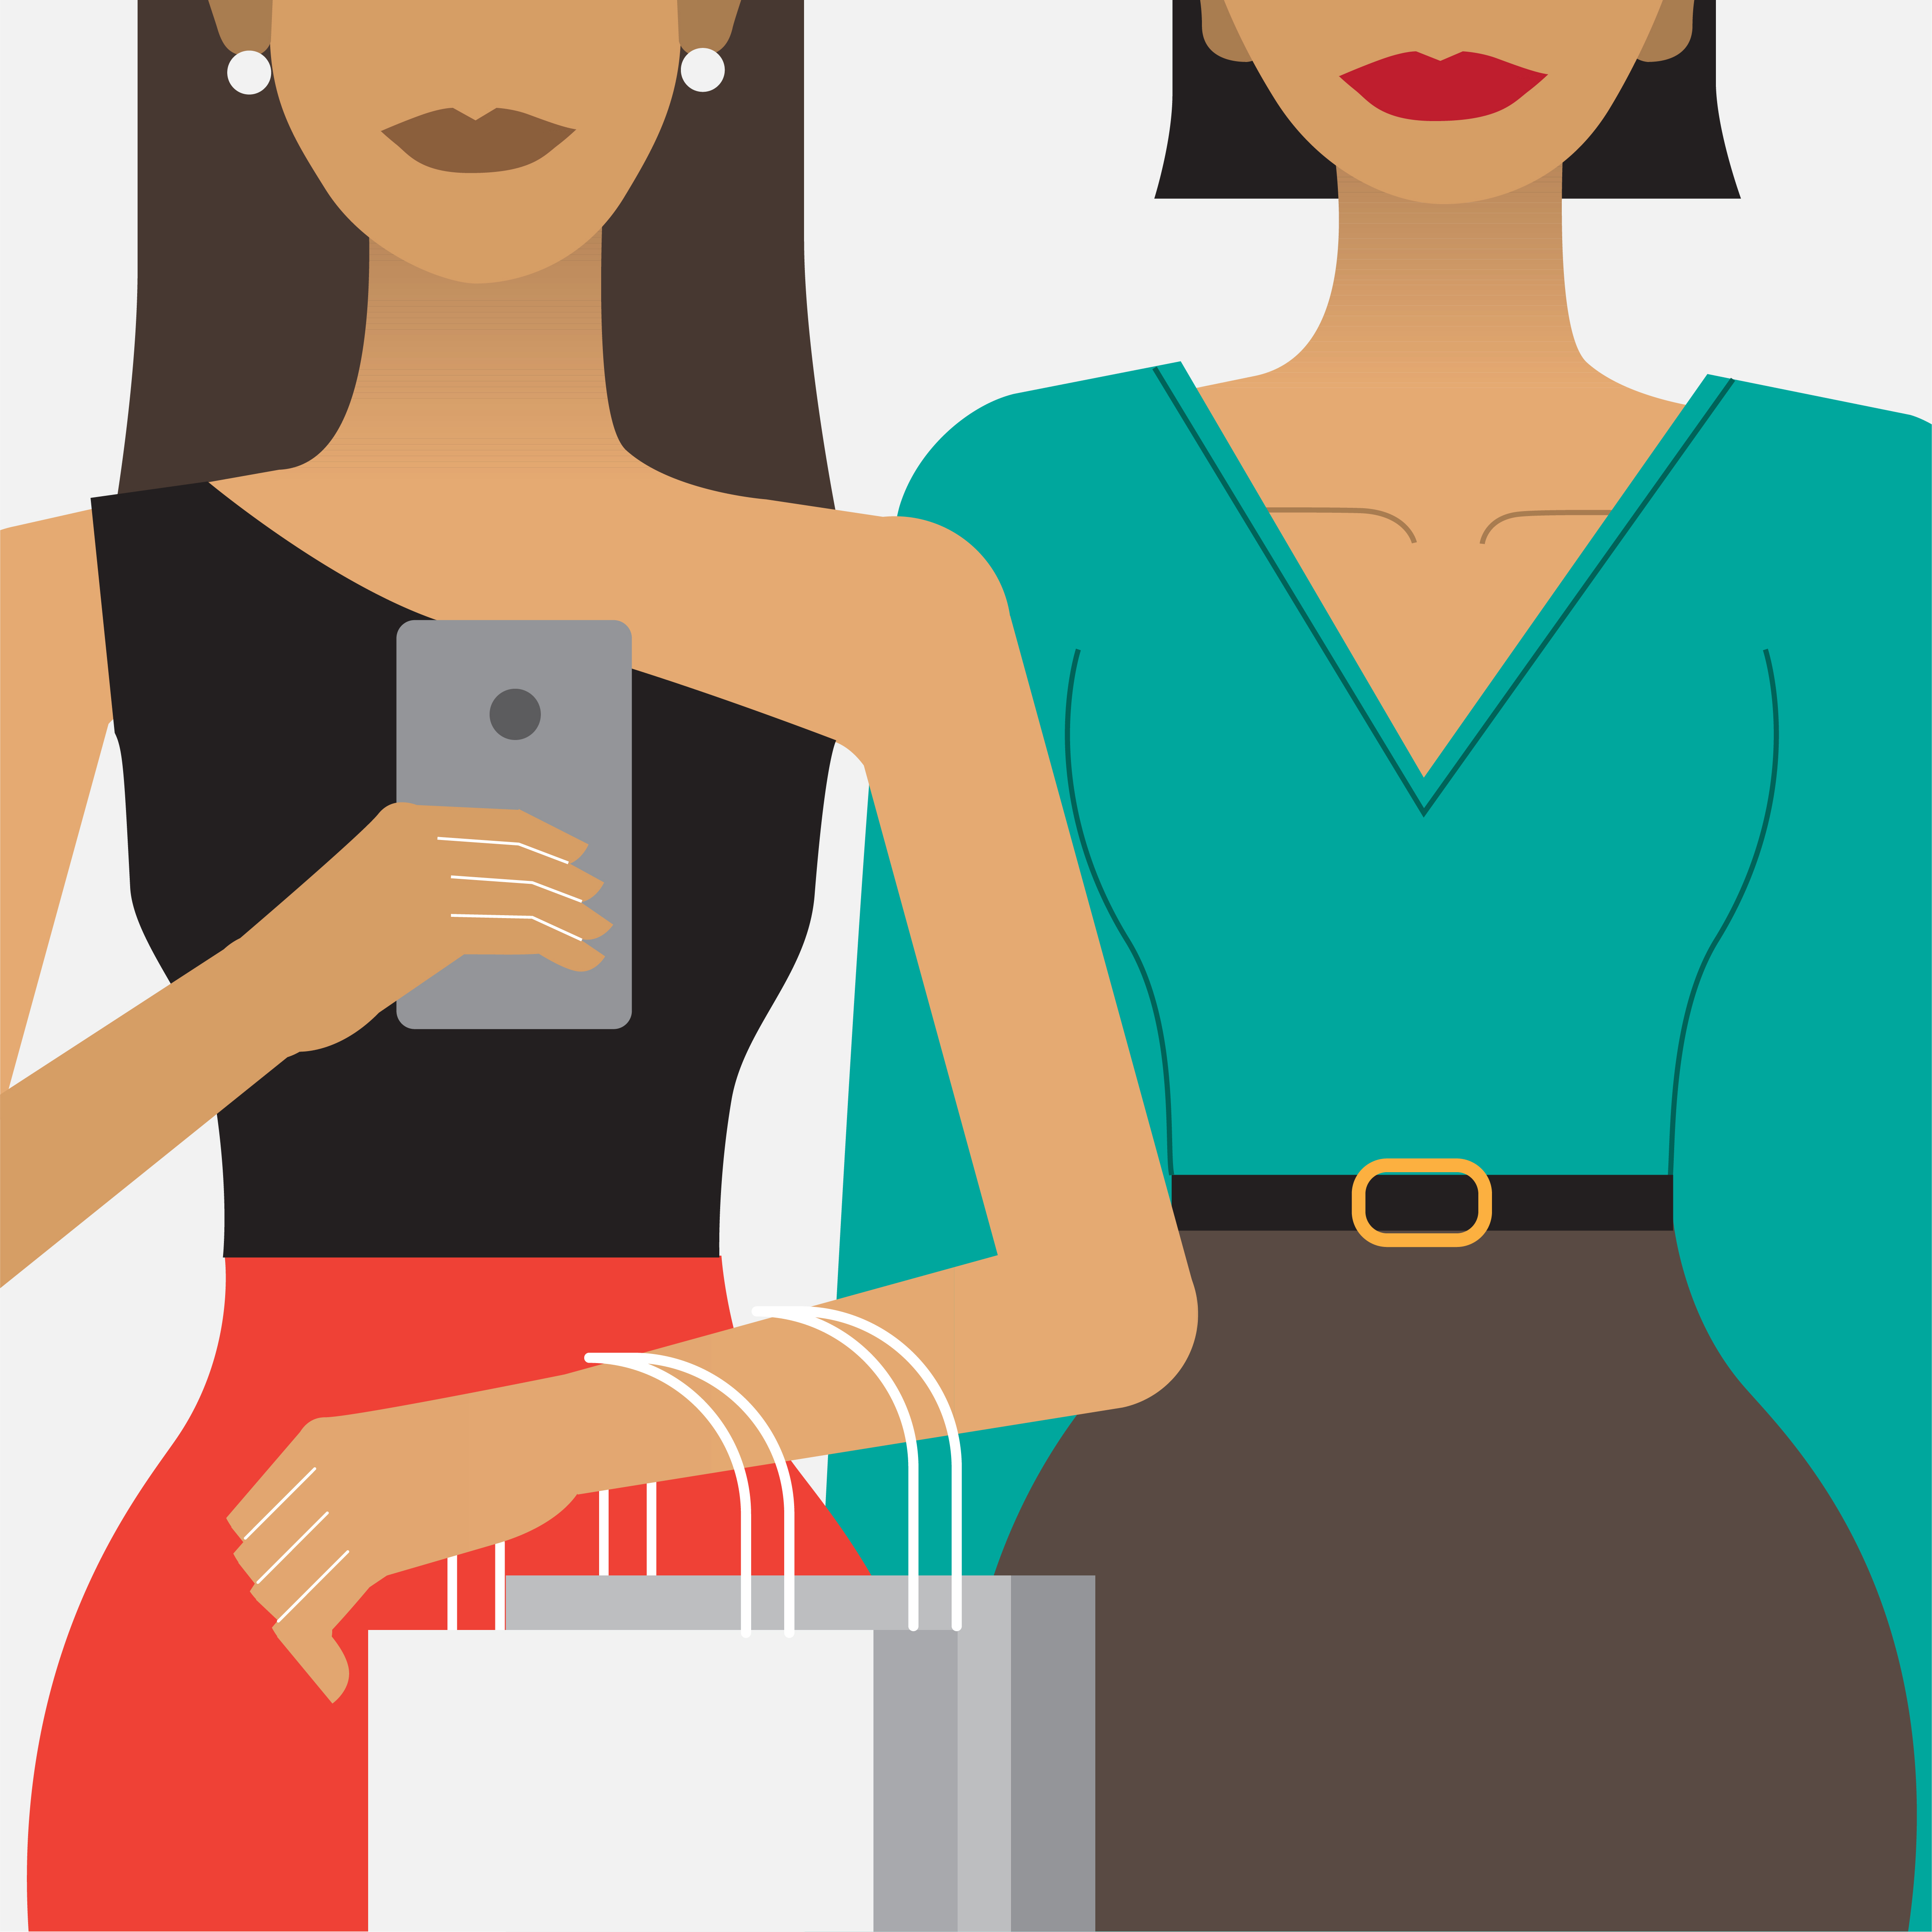 Download Women on a shopping spree illustration - Download Free Vectors, Clipart Graphics & Vector Art